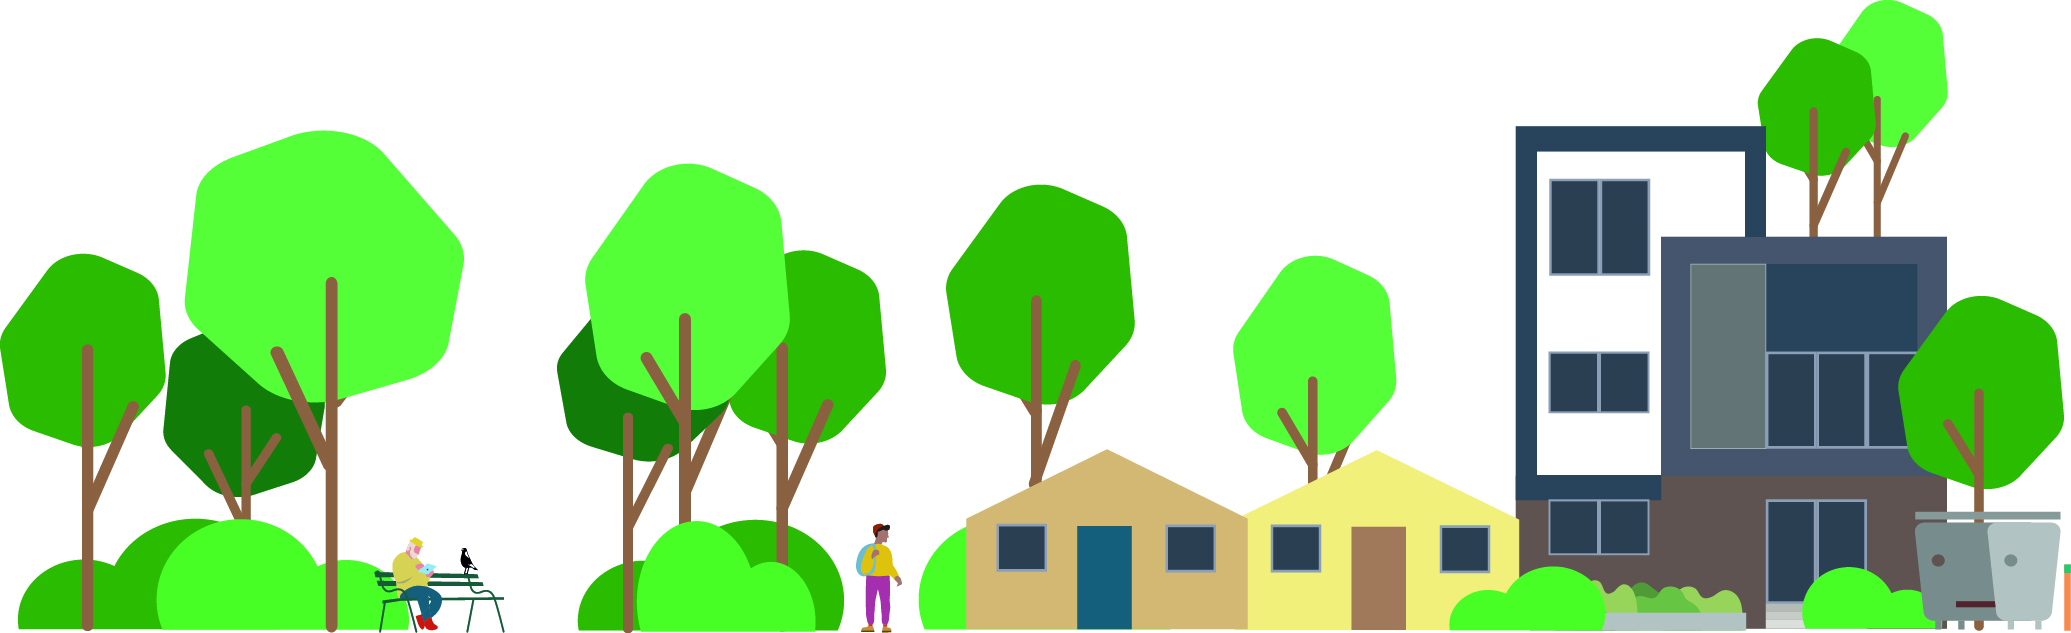 Illustration depicting trees and houses